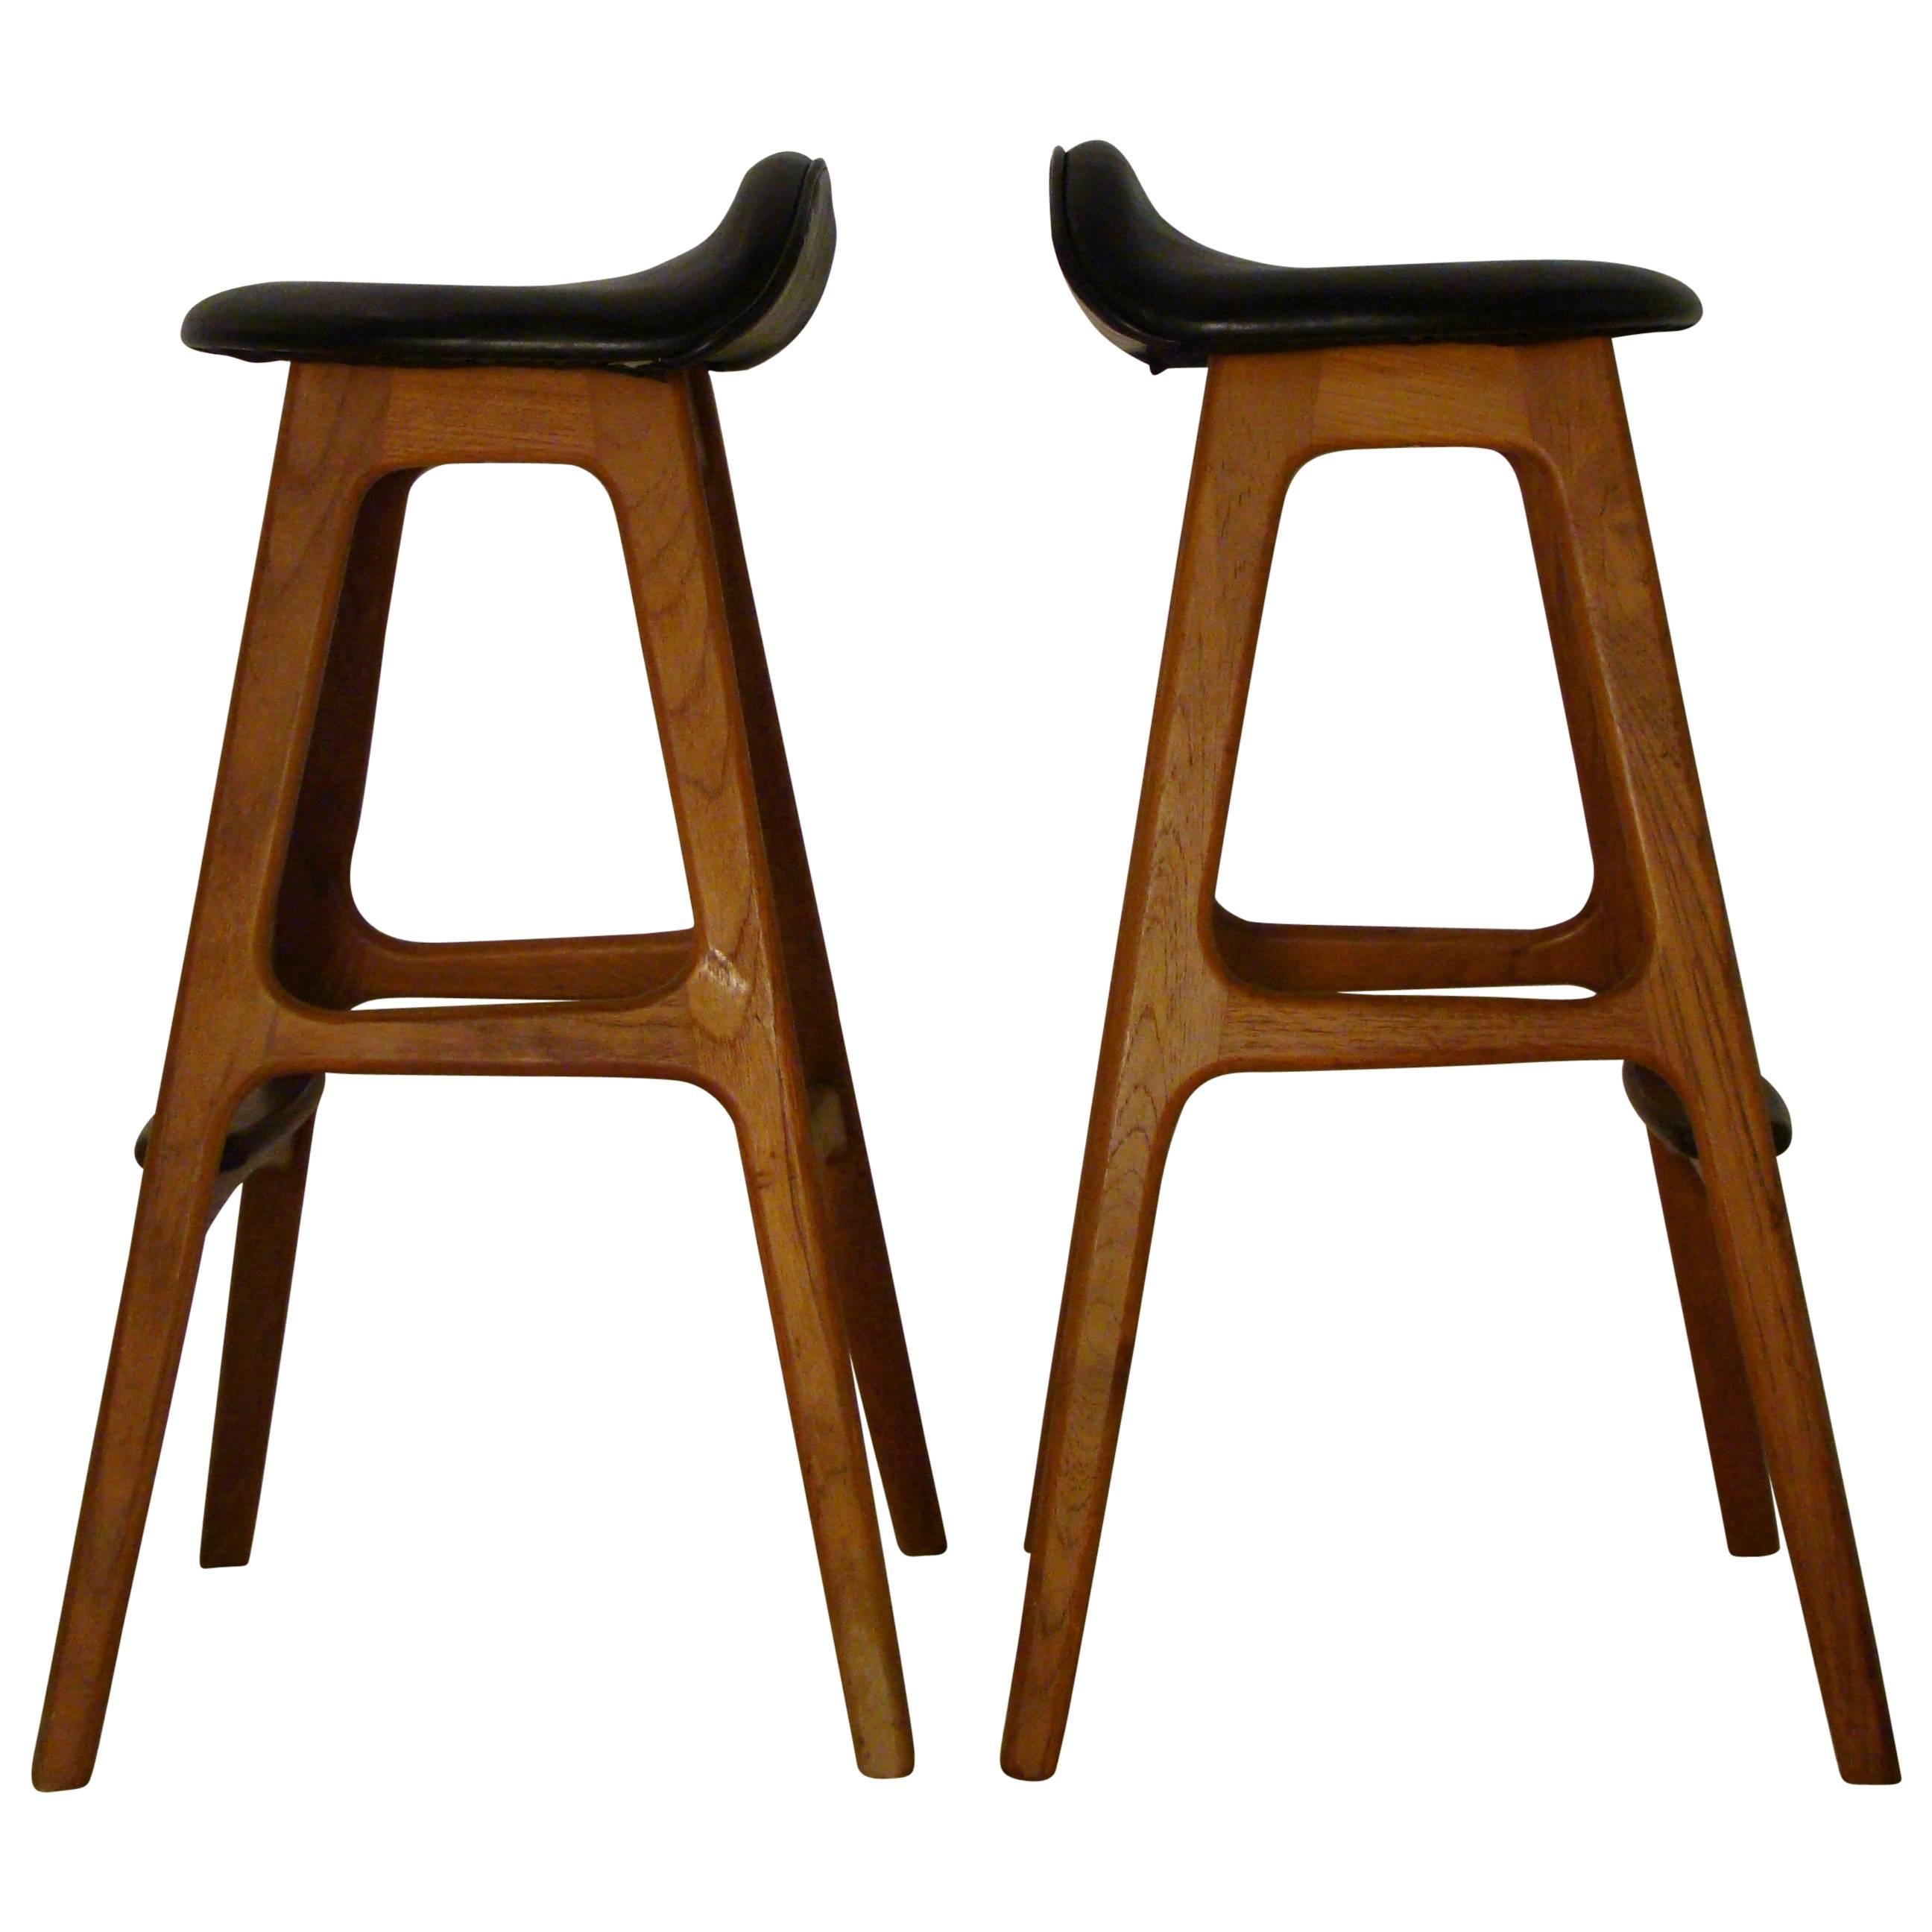 Pair of Teak and Rosewood Danish Modern Bar Stools by Erik Buch for OD Mobler